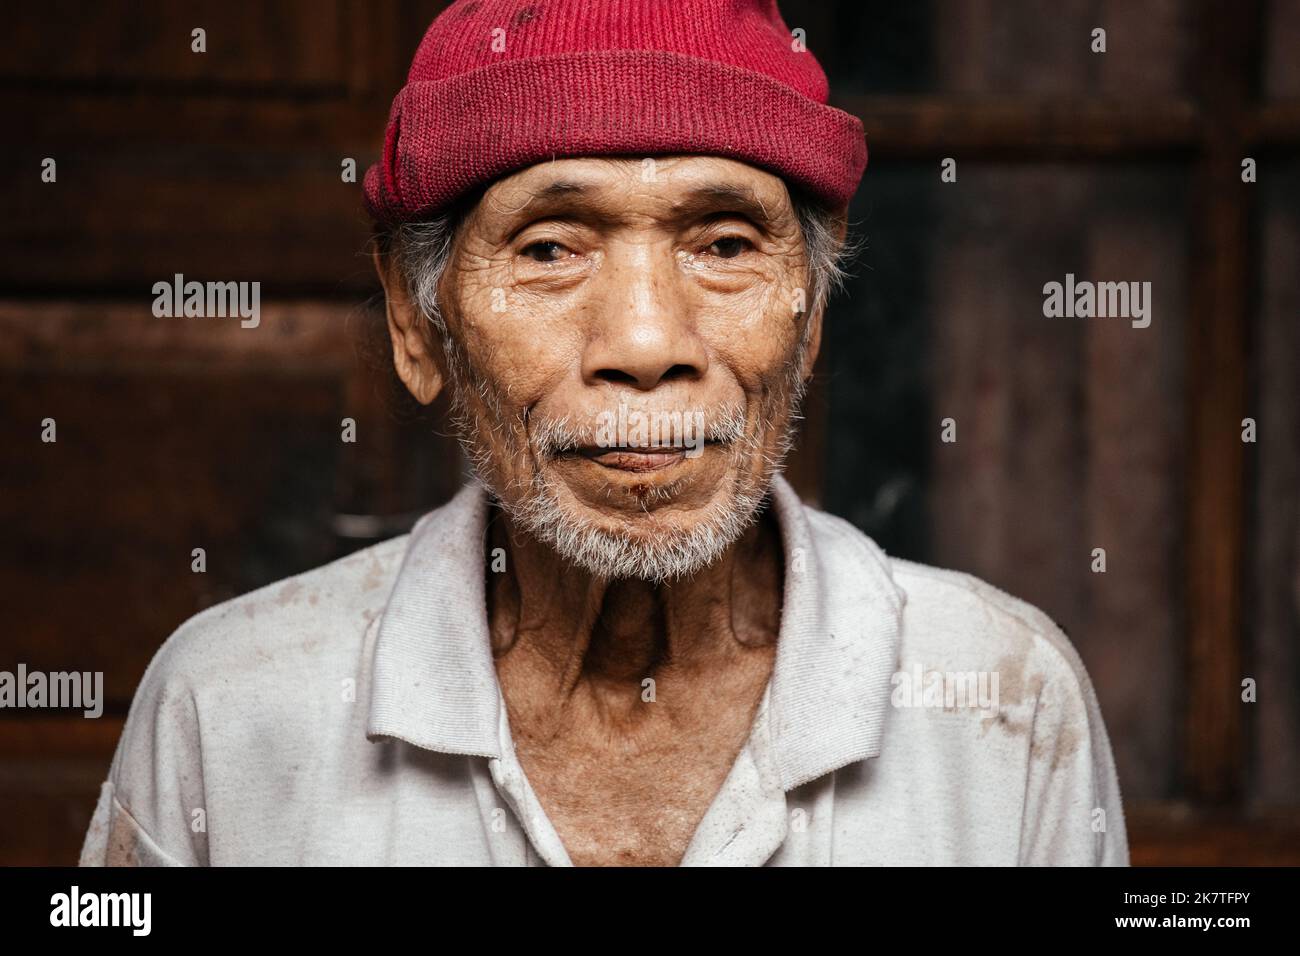 Portrait of an old Balinese man in an old sweater and cap. Indonesia, Bali, September 5, 2022. Stock Photo